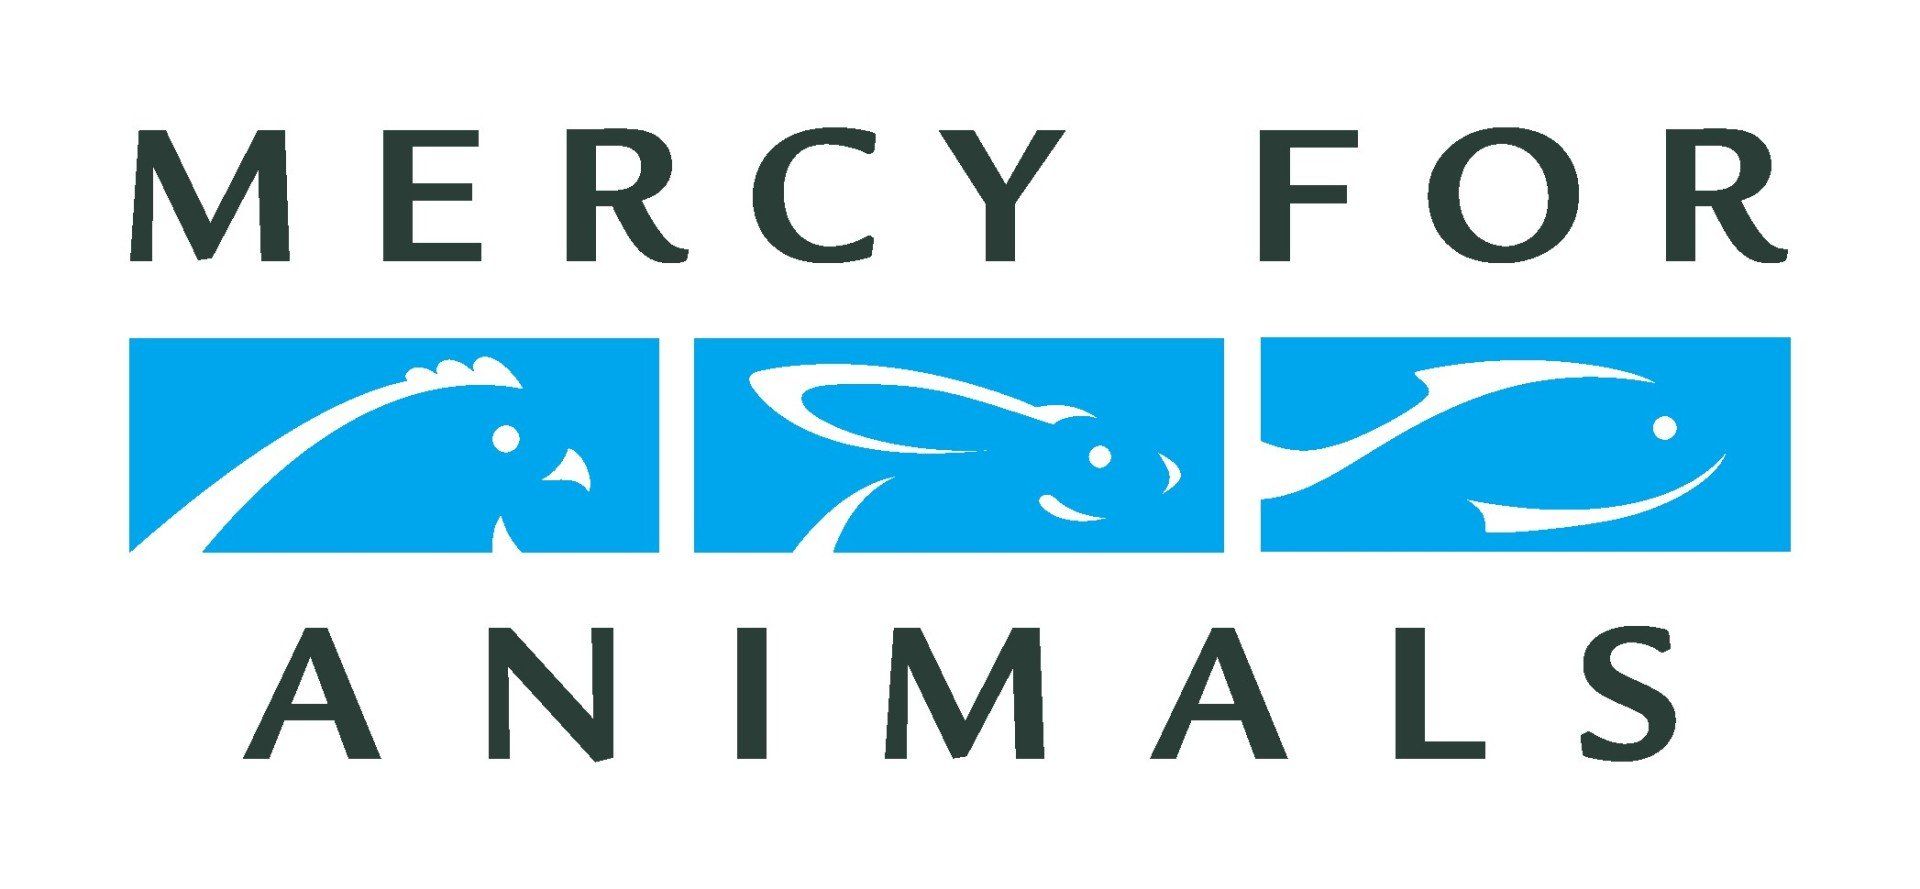 Mercy for Animals’ work aligns with the following UN Sustainable Development Goals